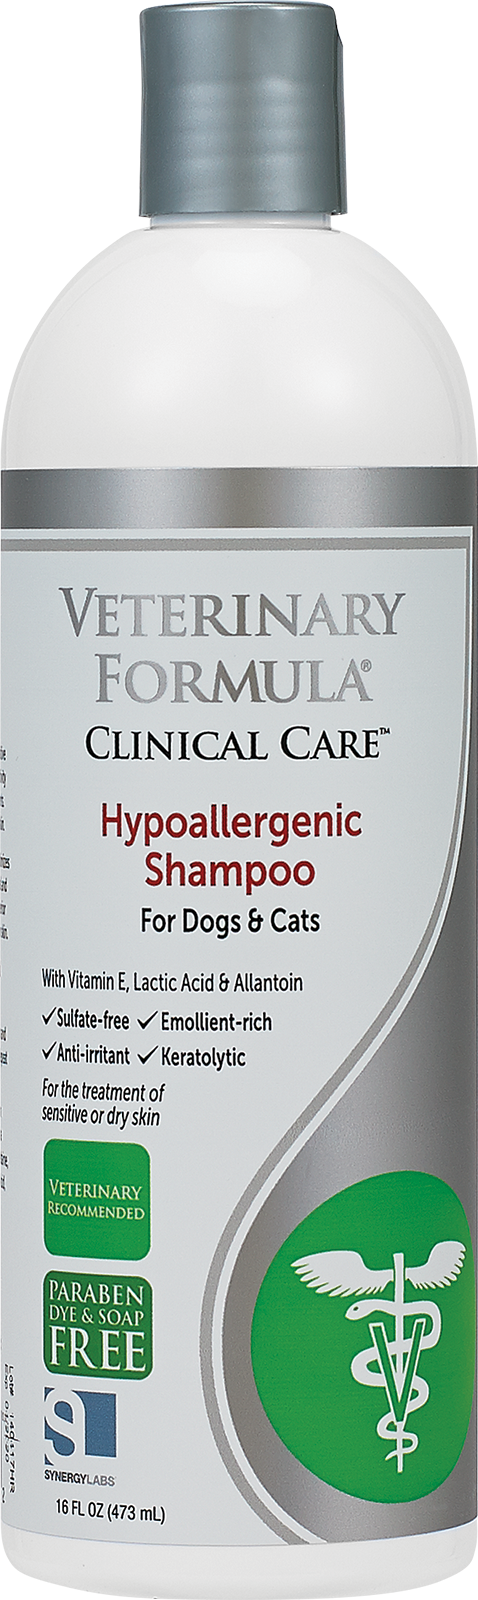 Synergy Labs Hypoallergenic Shampoo